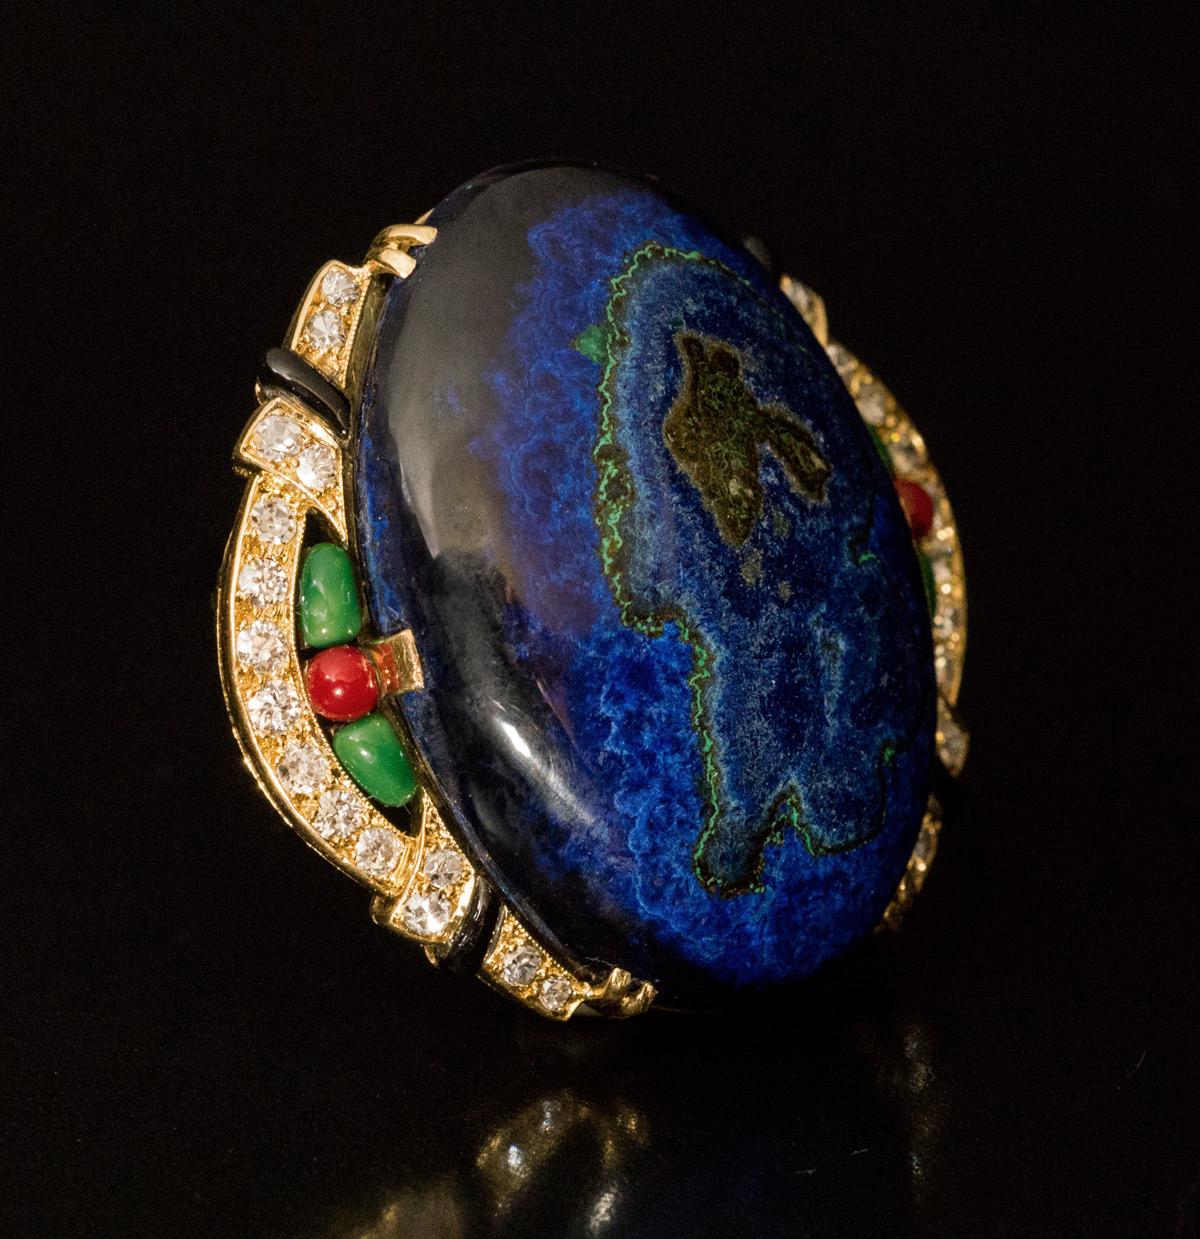 Circa 1925

This remarkable vintage French Art Deco brooch / pin features an oval cabochon cut azurite malachite set in an elaborate, slightly asymmetrical 18K gold bezel.  The bezel is embellished with bright white old cut diamonds (F-G color, SI